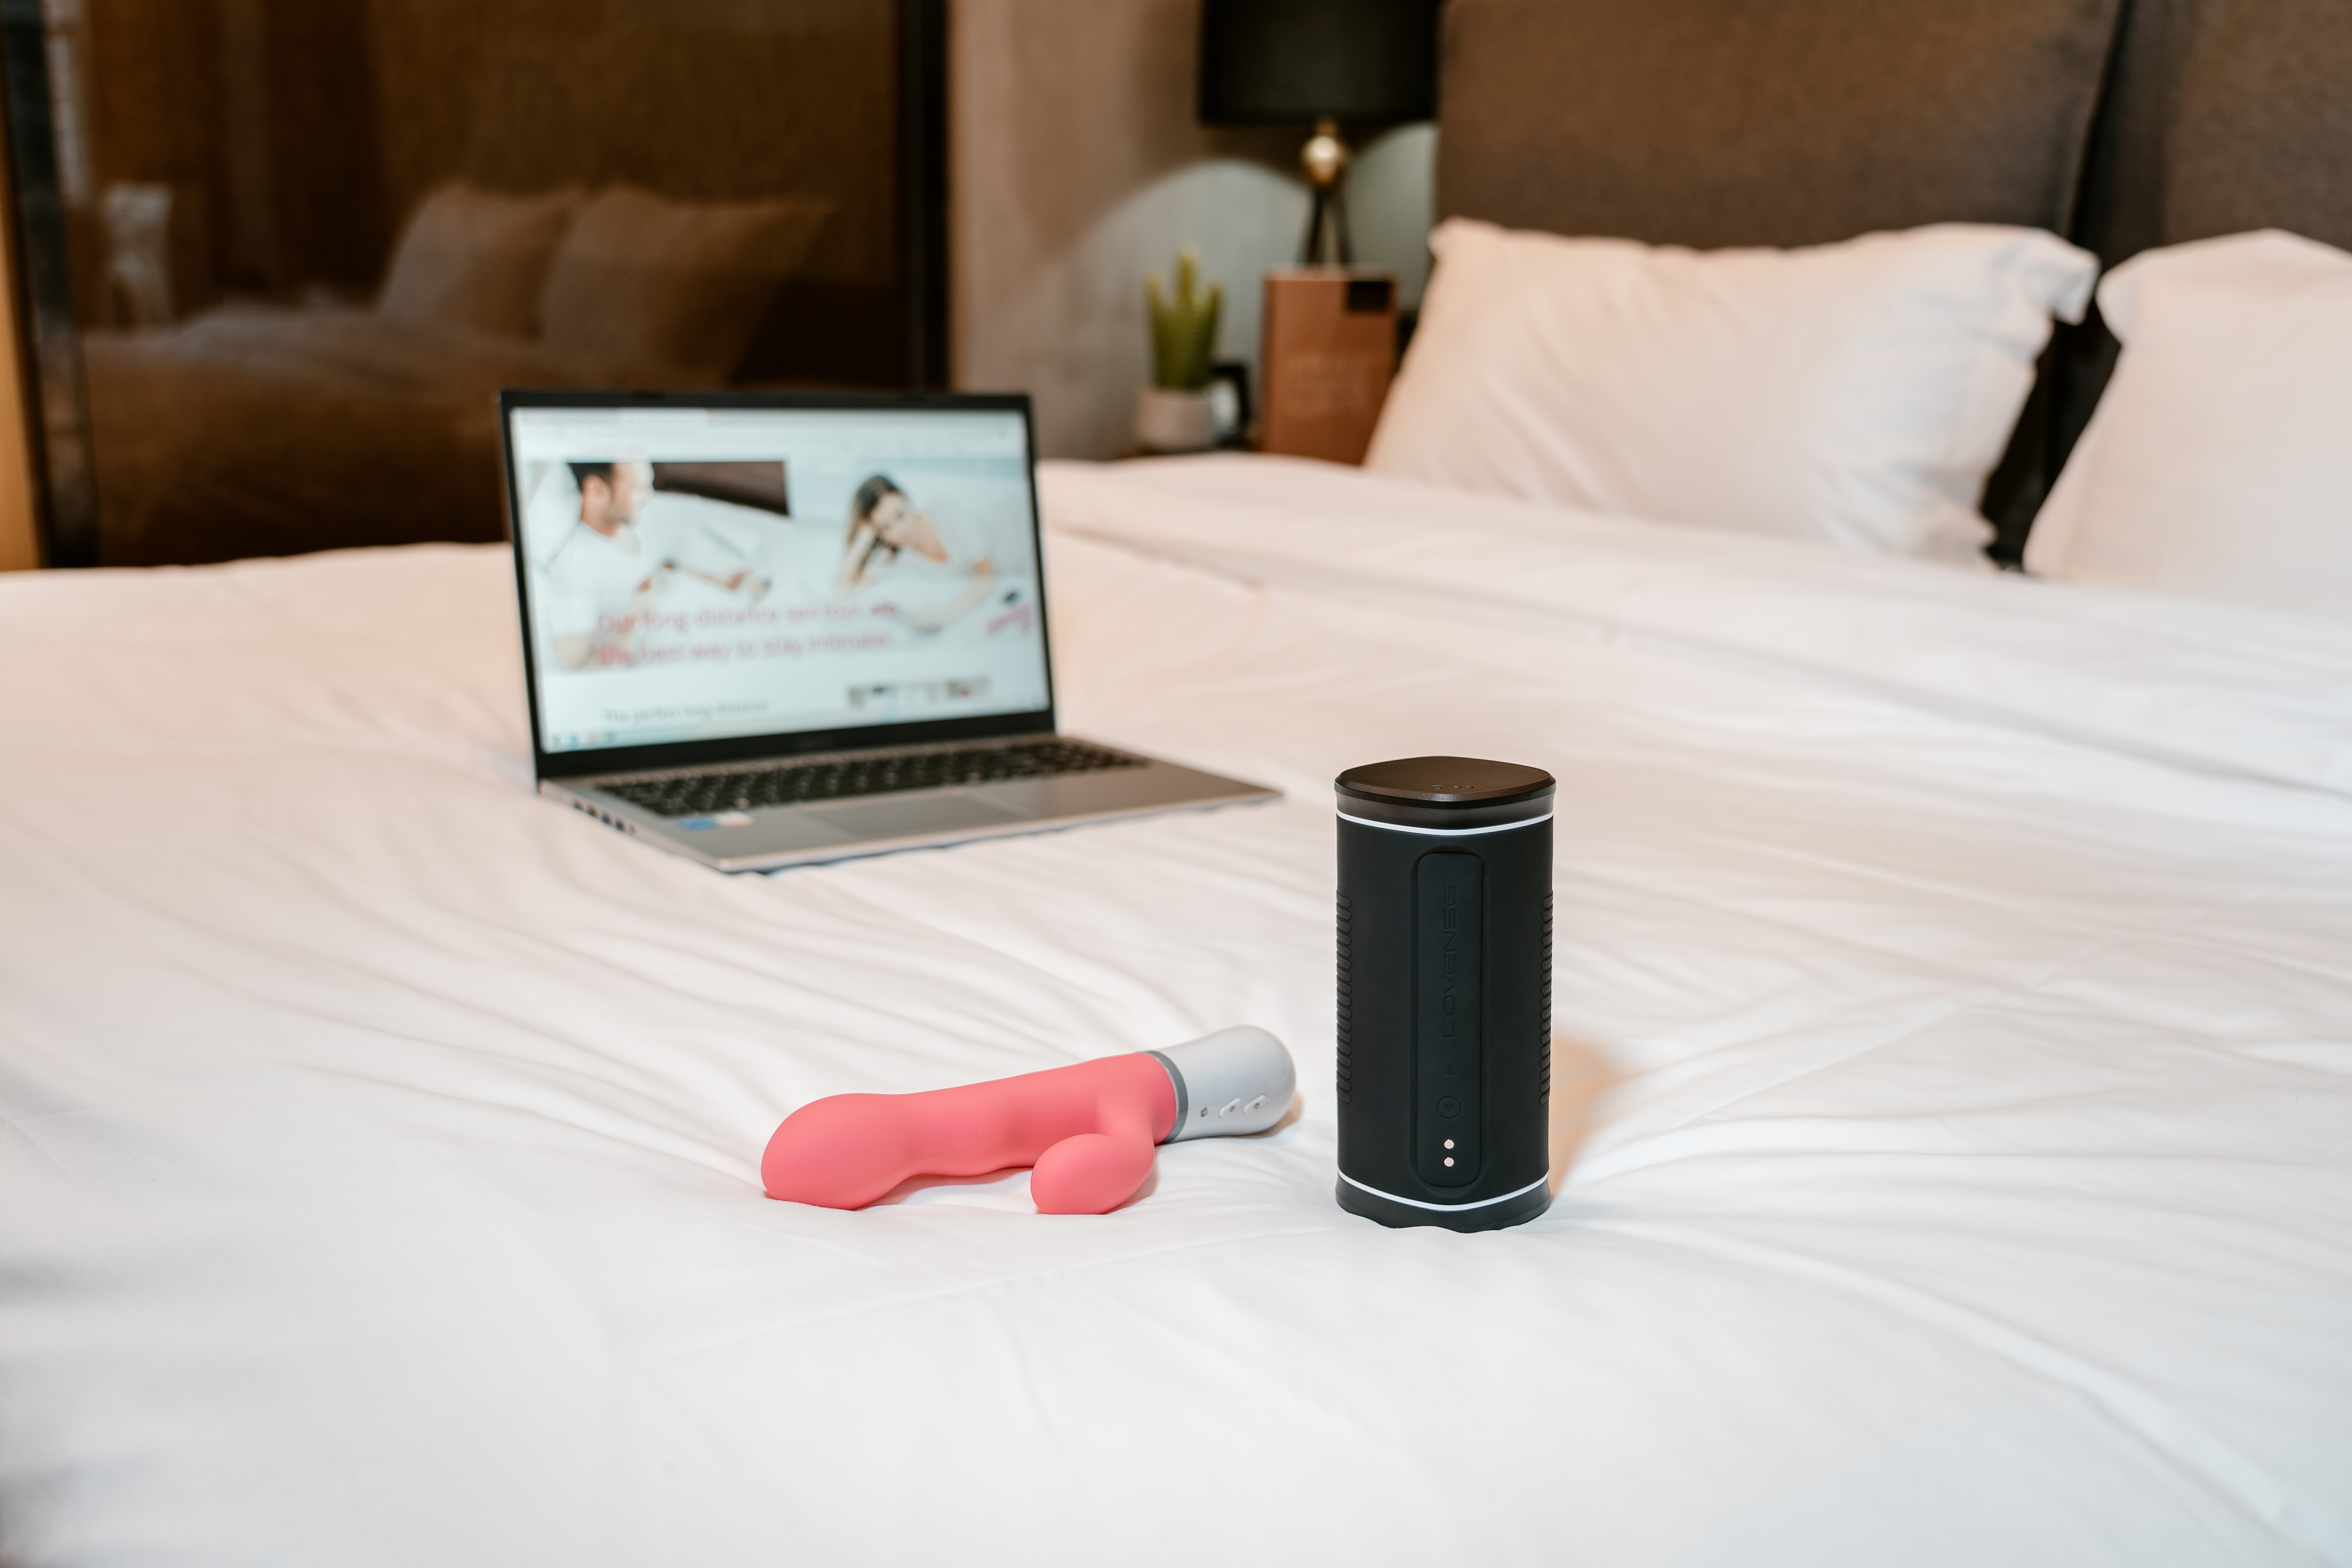 The Bluetooth controlled sex toys Nora and Calor, and a laptop on a bed.